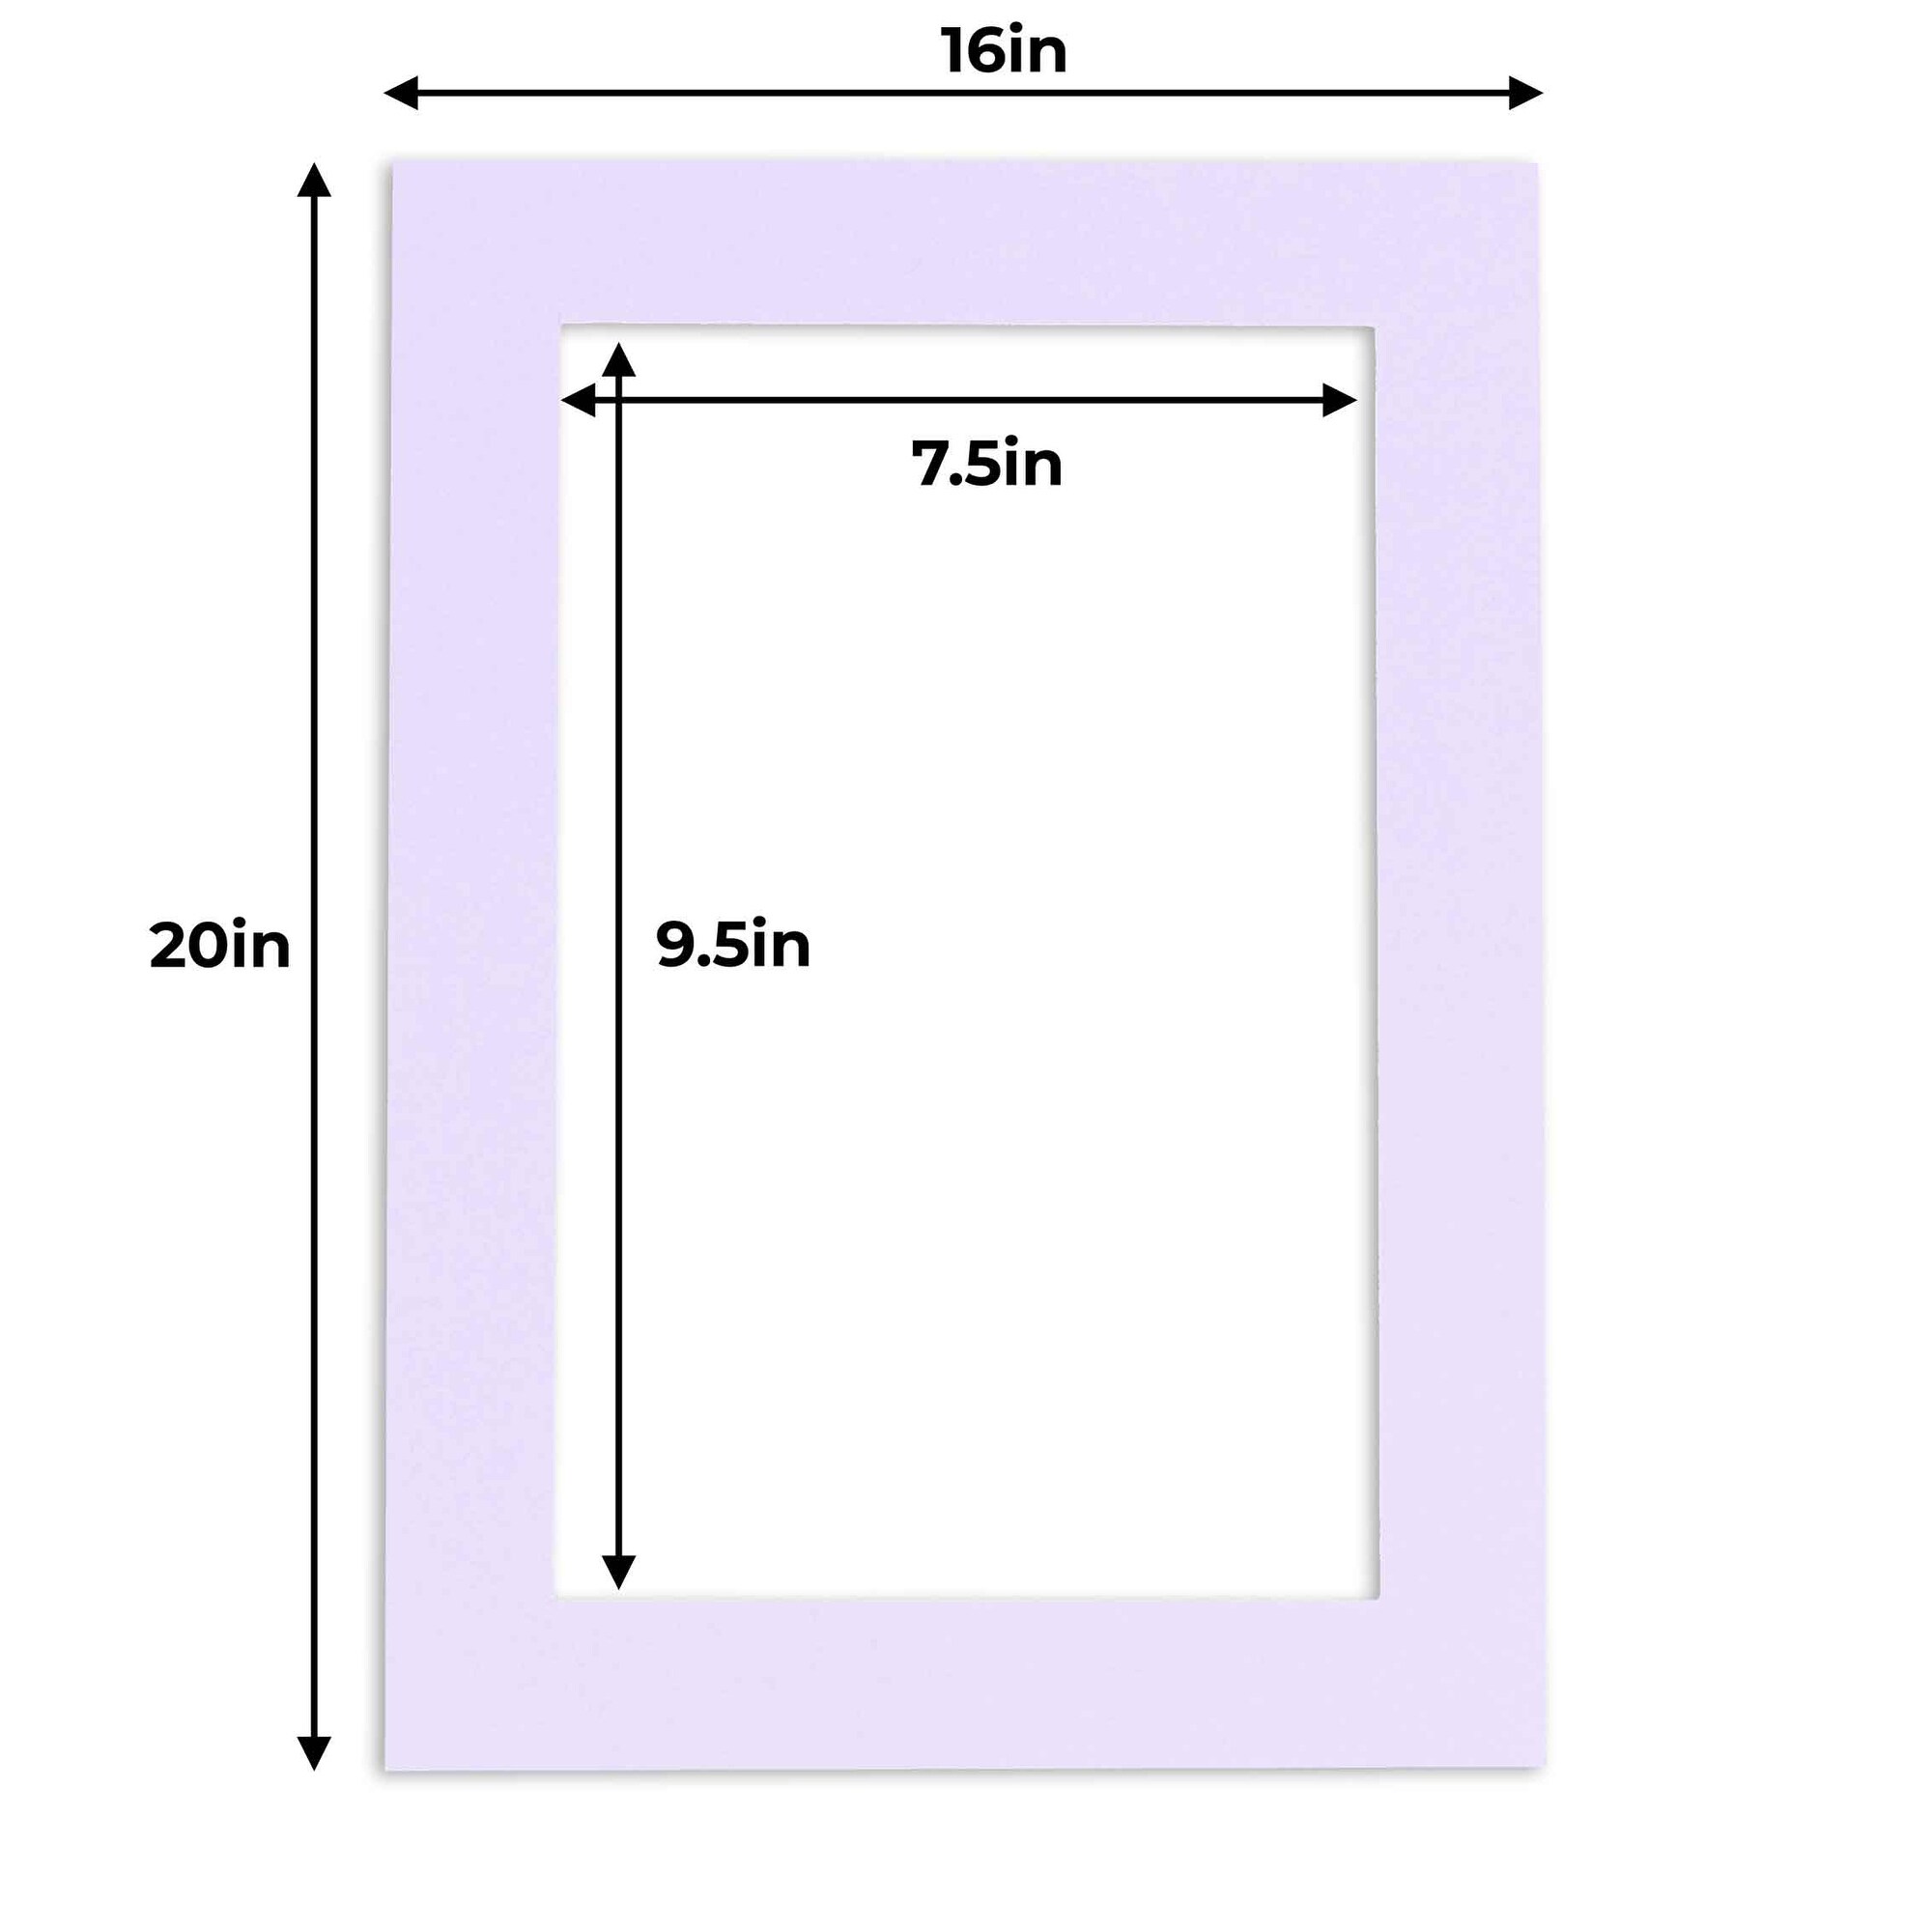 PosterPalooza 16x20 Mat for 8x10 Photo - Purple Matboard for Frames  Measuring 16 x 20 Inches - To Display Art Measuring 8 x 10 Inches -  ShopStyle